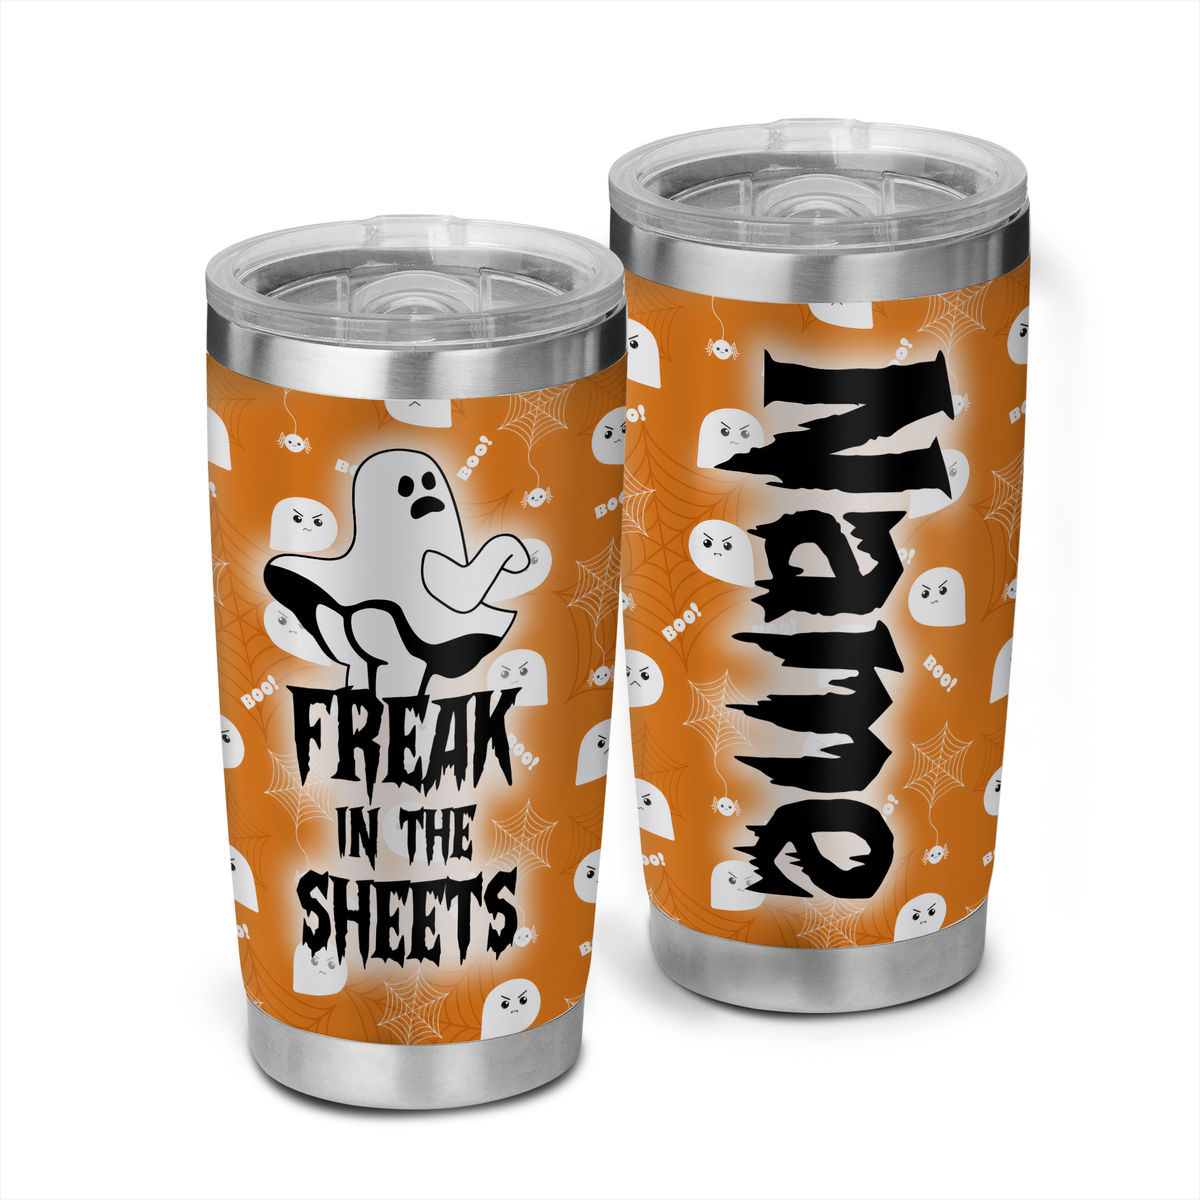 Halloween Here for the Booos Steel Tumbler